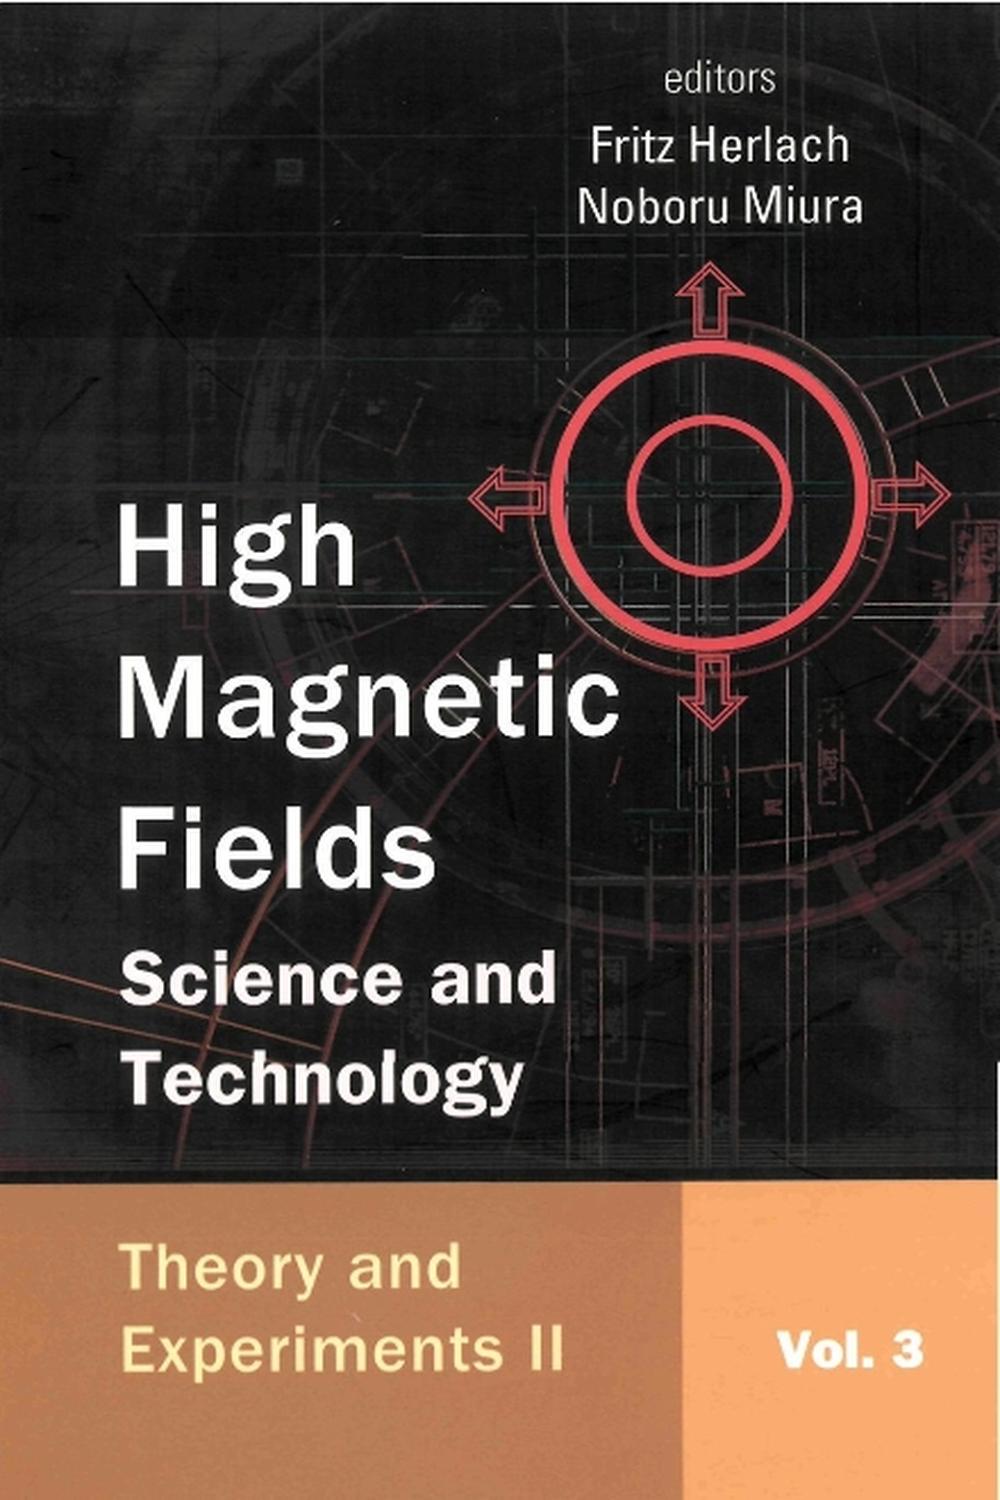 High Magnetic Fields: Science And Technology (In 3 Volumes) - Vol. 3 - Fritz Herlach, Noboru Miura